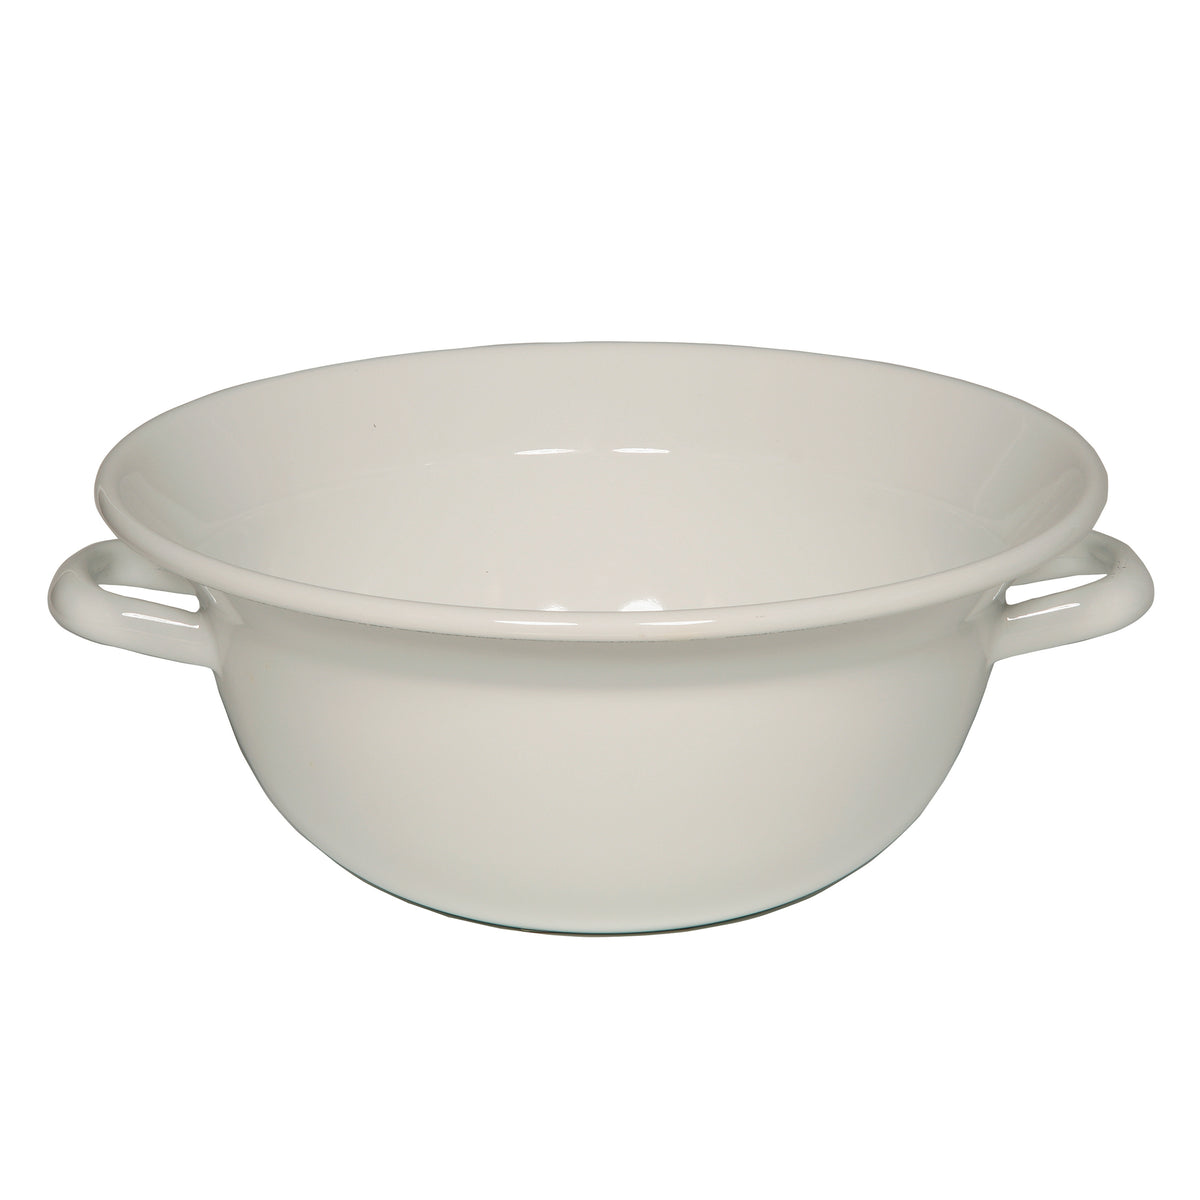 Large bowl with two handles